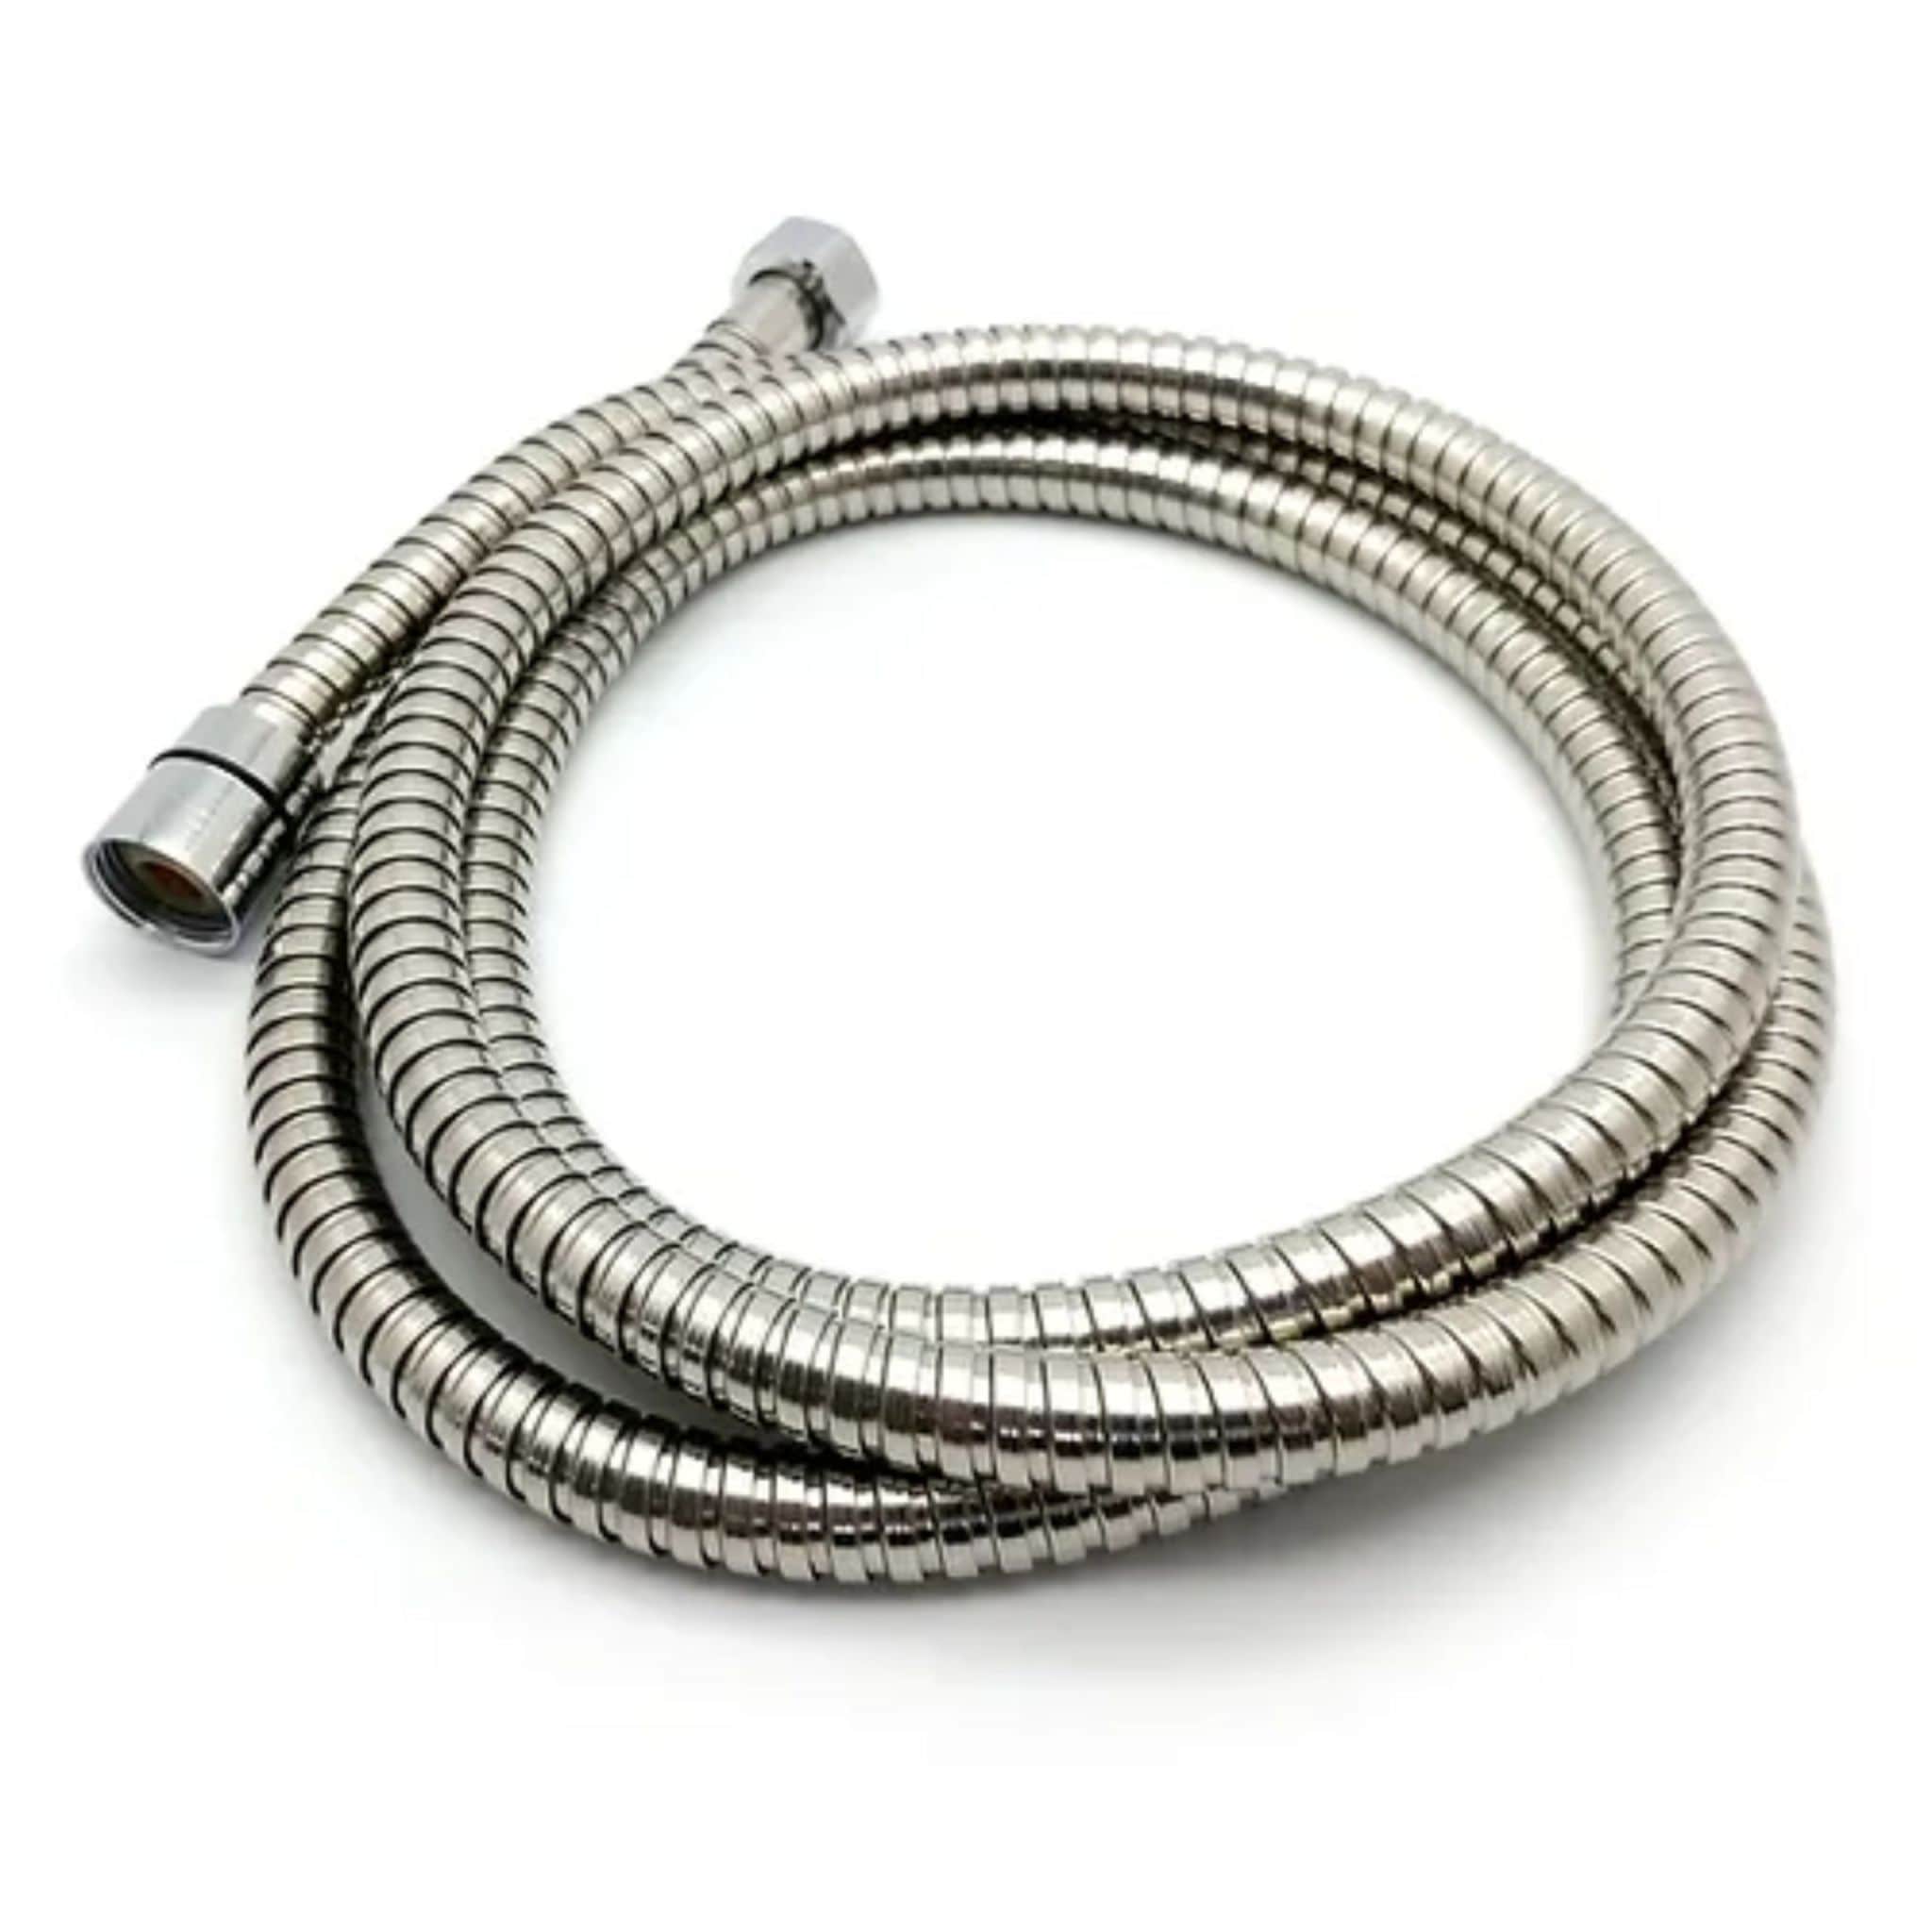 OE SmoothPour 1.75M Stainless Steel Hand Shower Flexi Pipe – Elegant, Flexible, and Durable Shower Hose